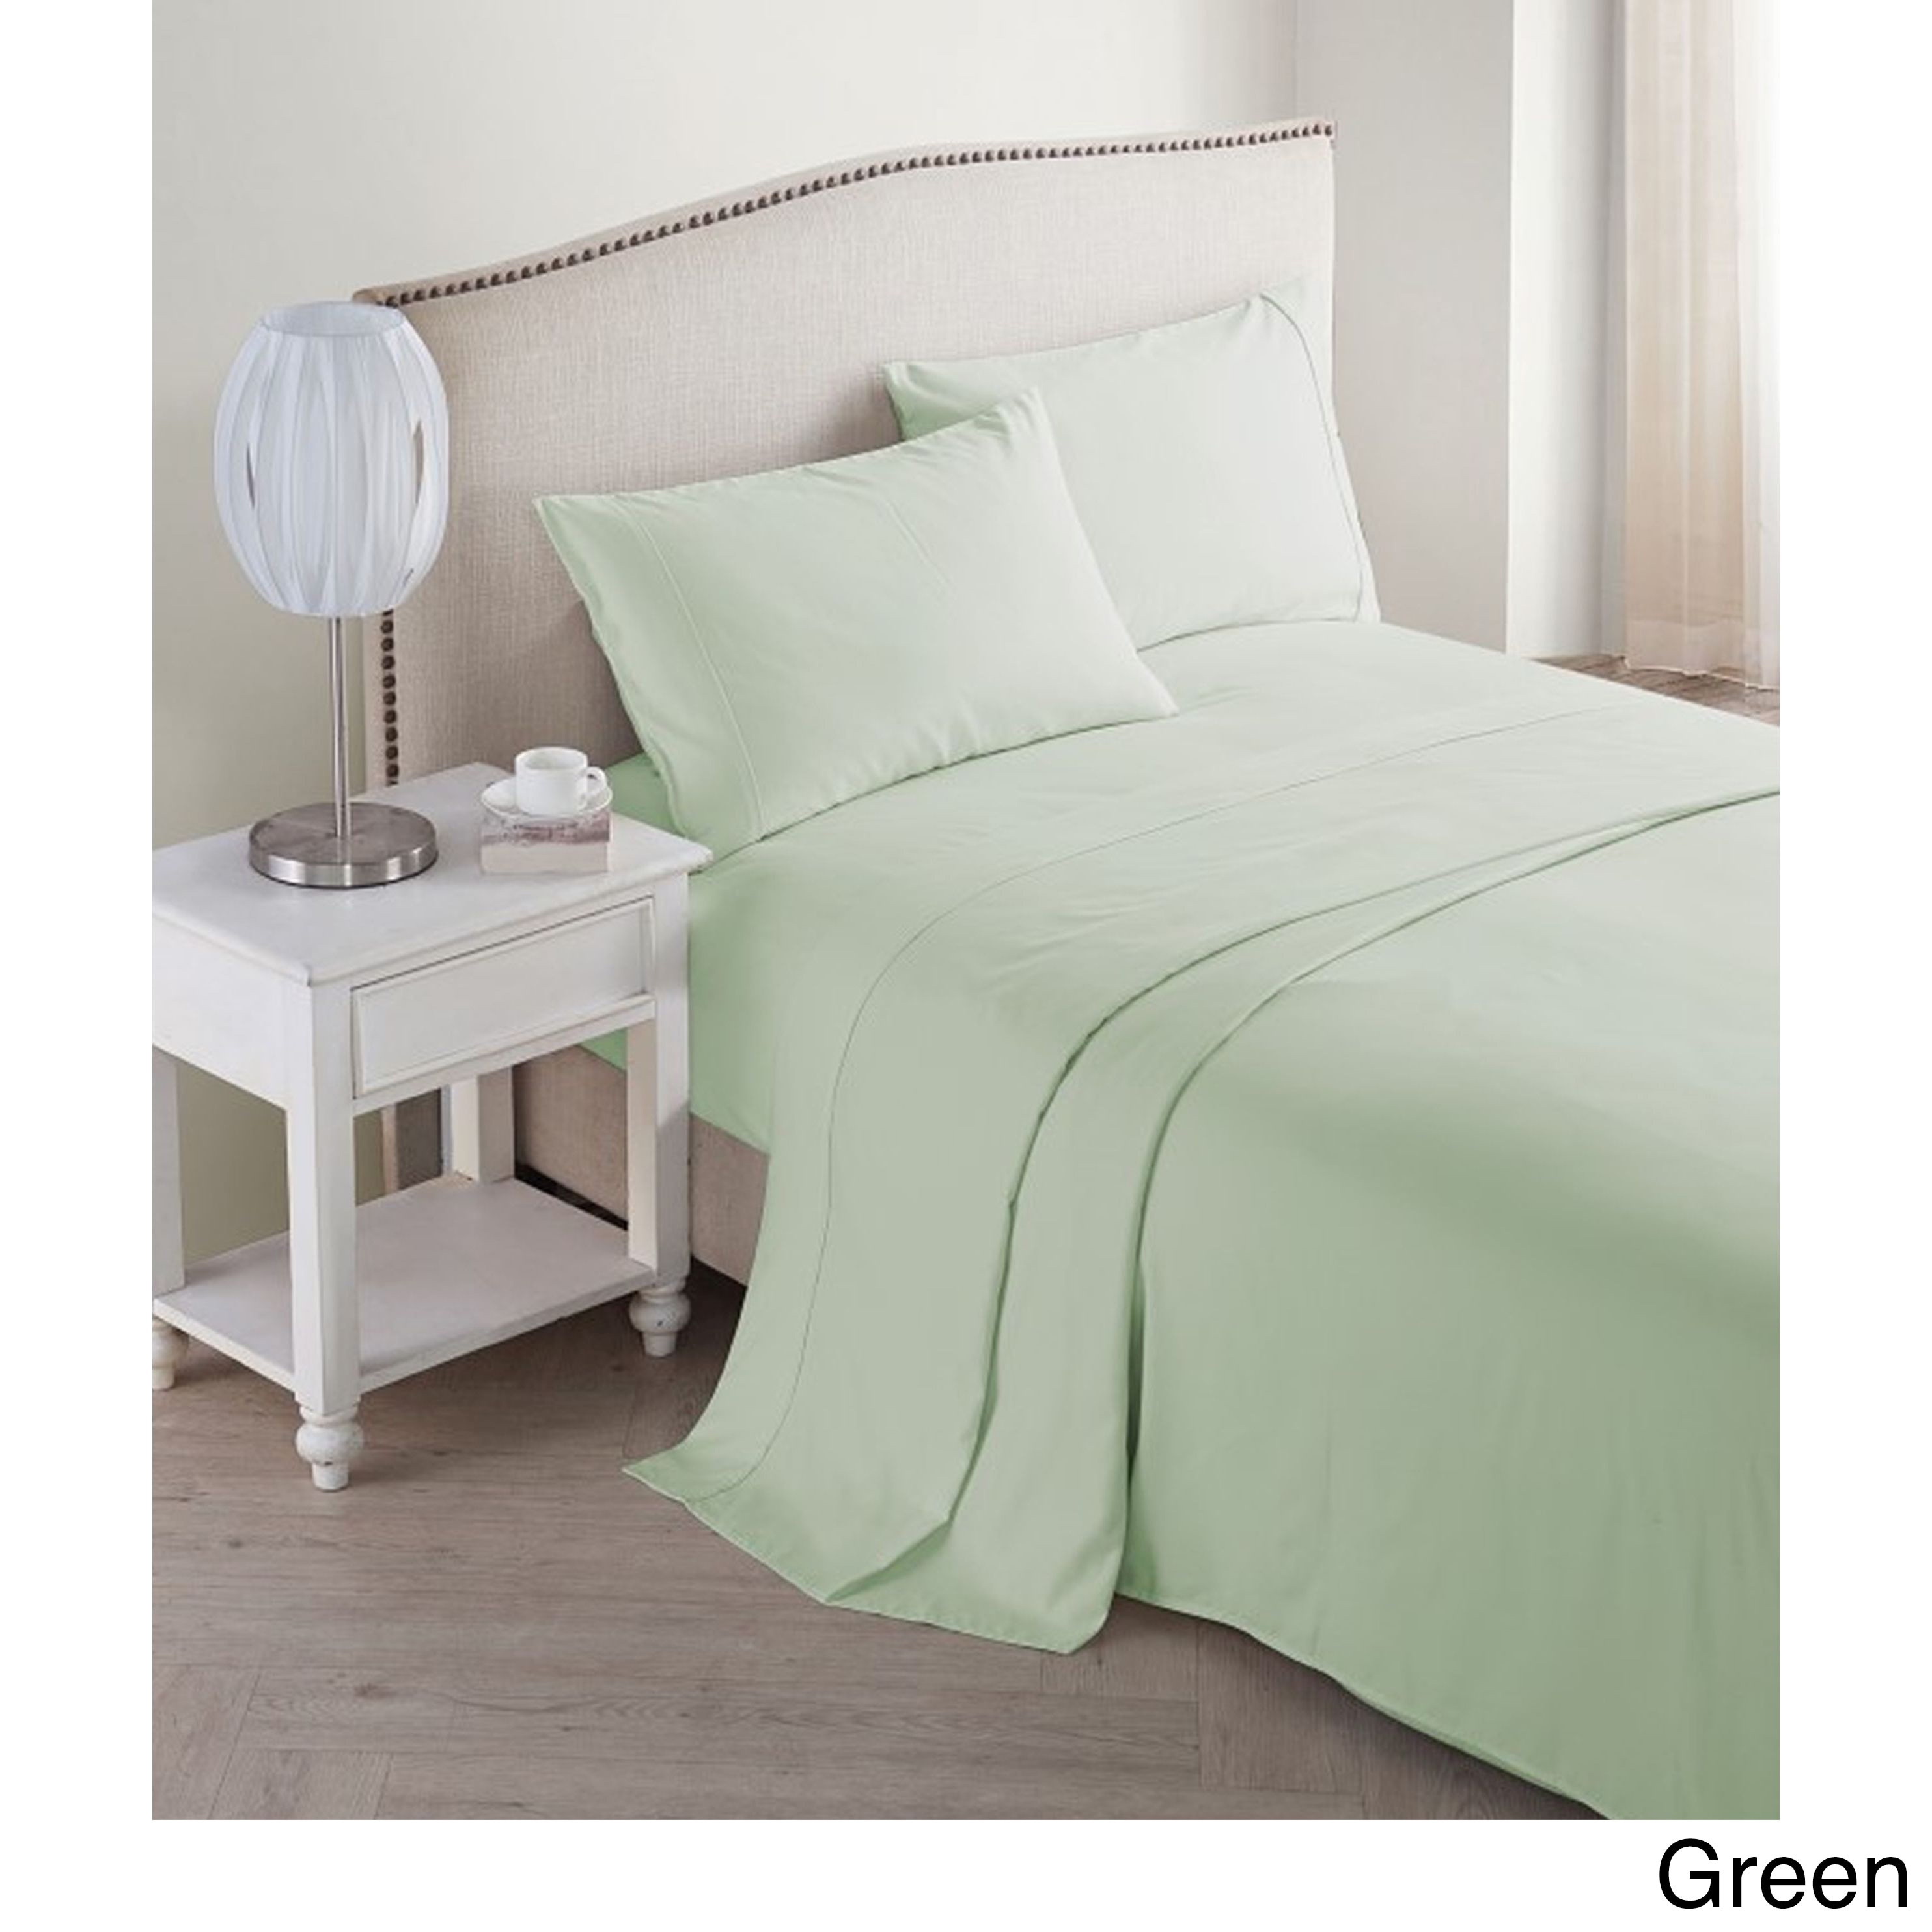 New Branded Bedding Item Egyptian Cotton 800 Thread Count Solid Colors yo YO!!.